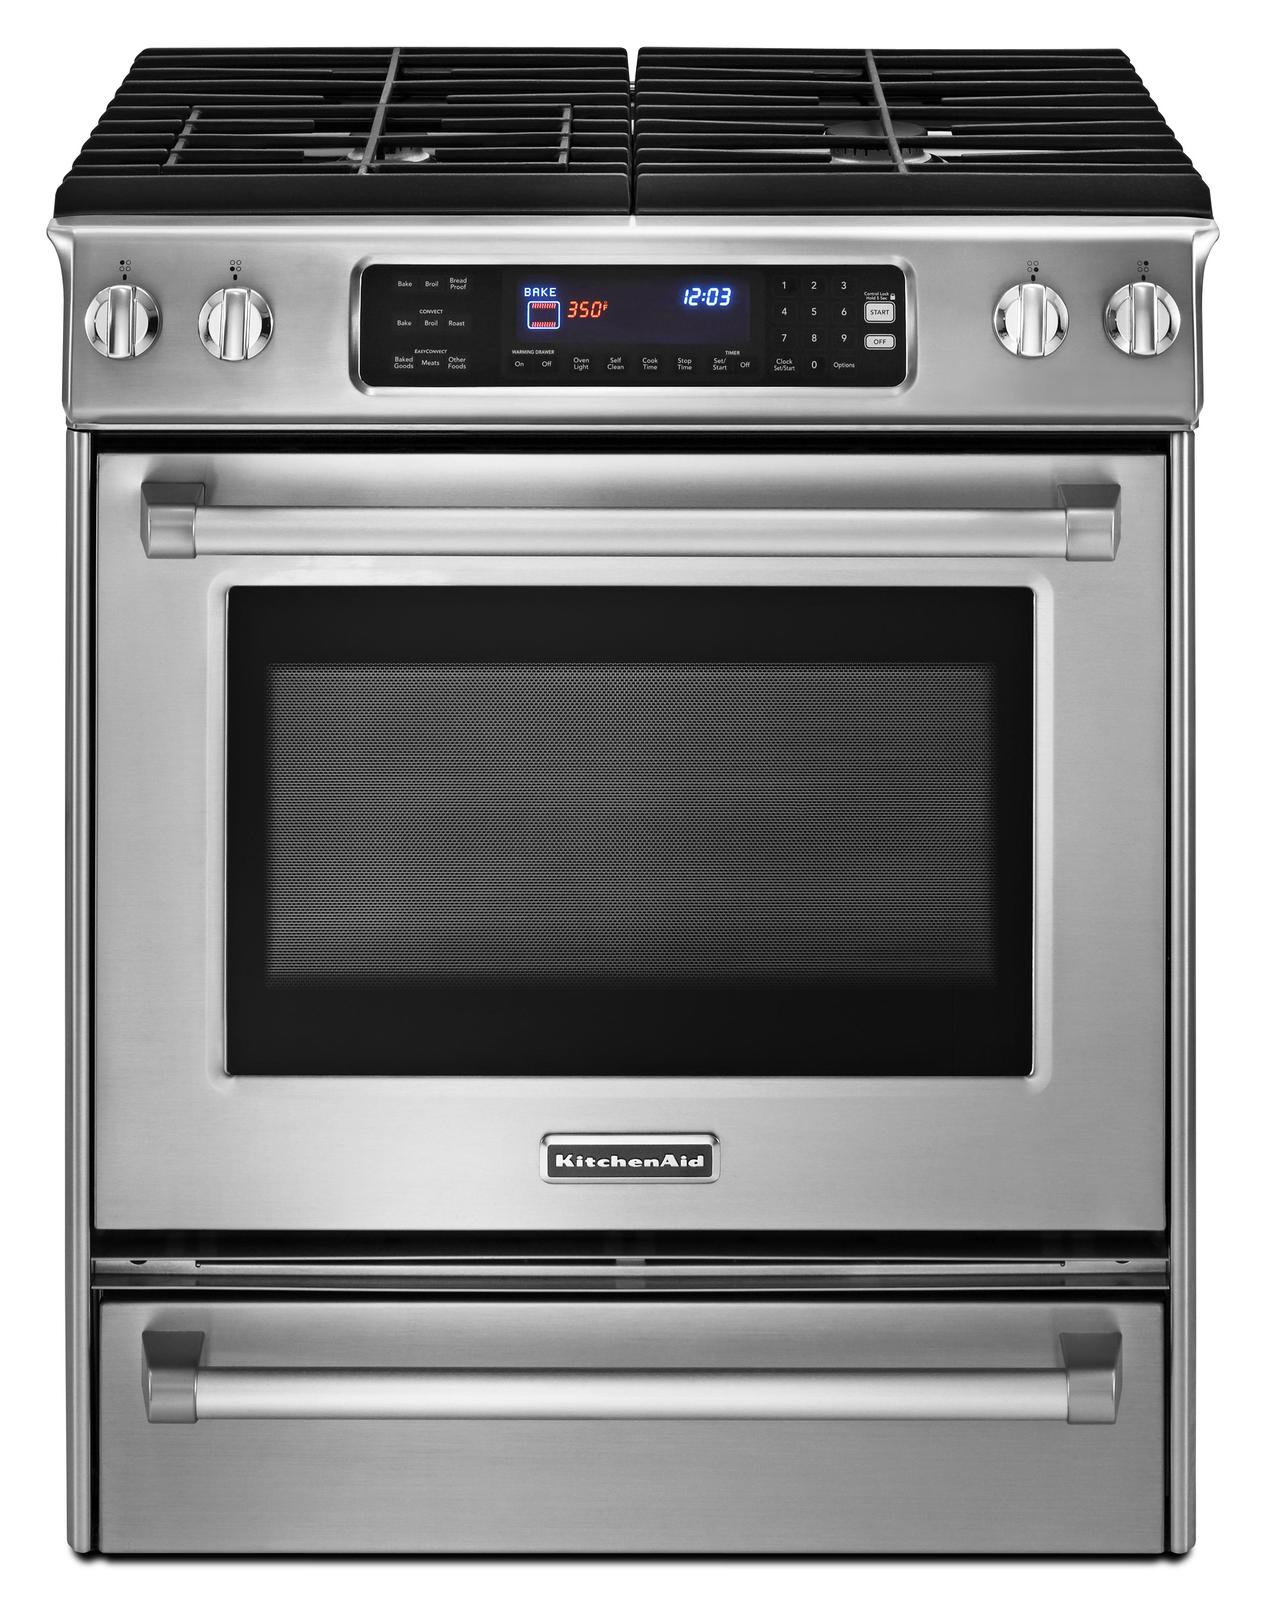 Brand KitchenAid, Model KGSS907XSP, Color Stainless Steel